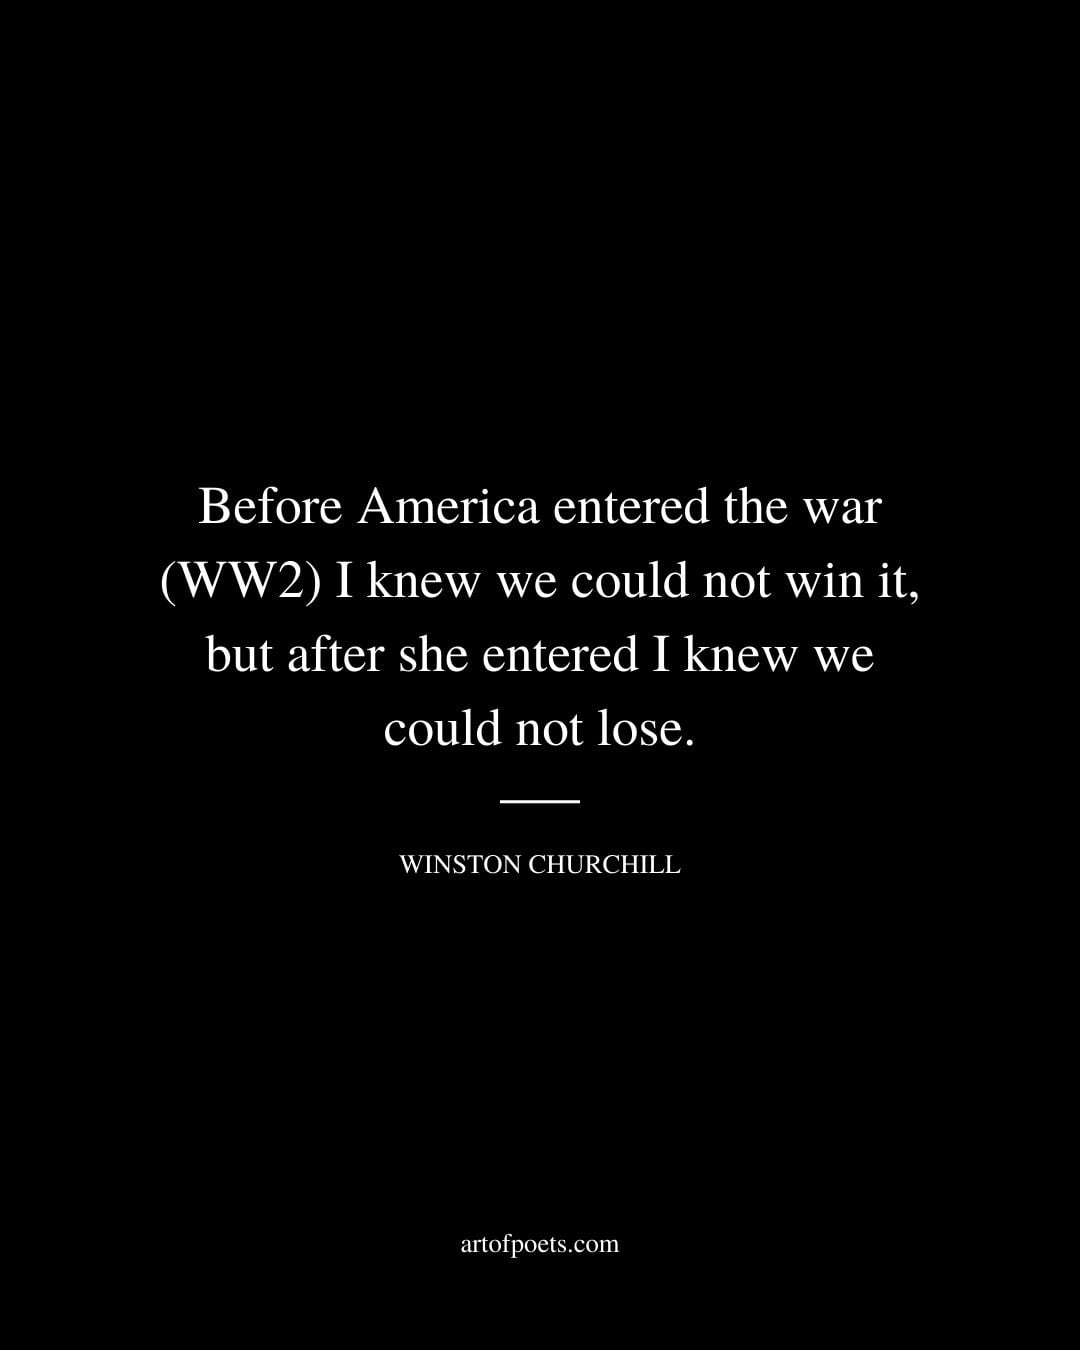 Before America entered the war WW2 I knew we could not win it but after she entered I knew we could not lose